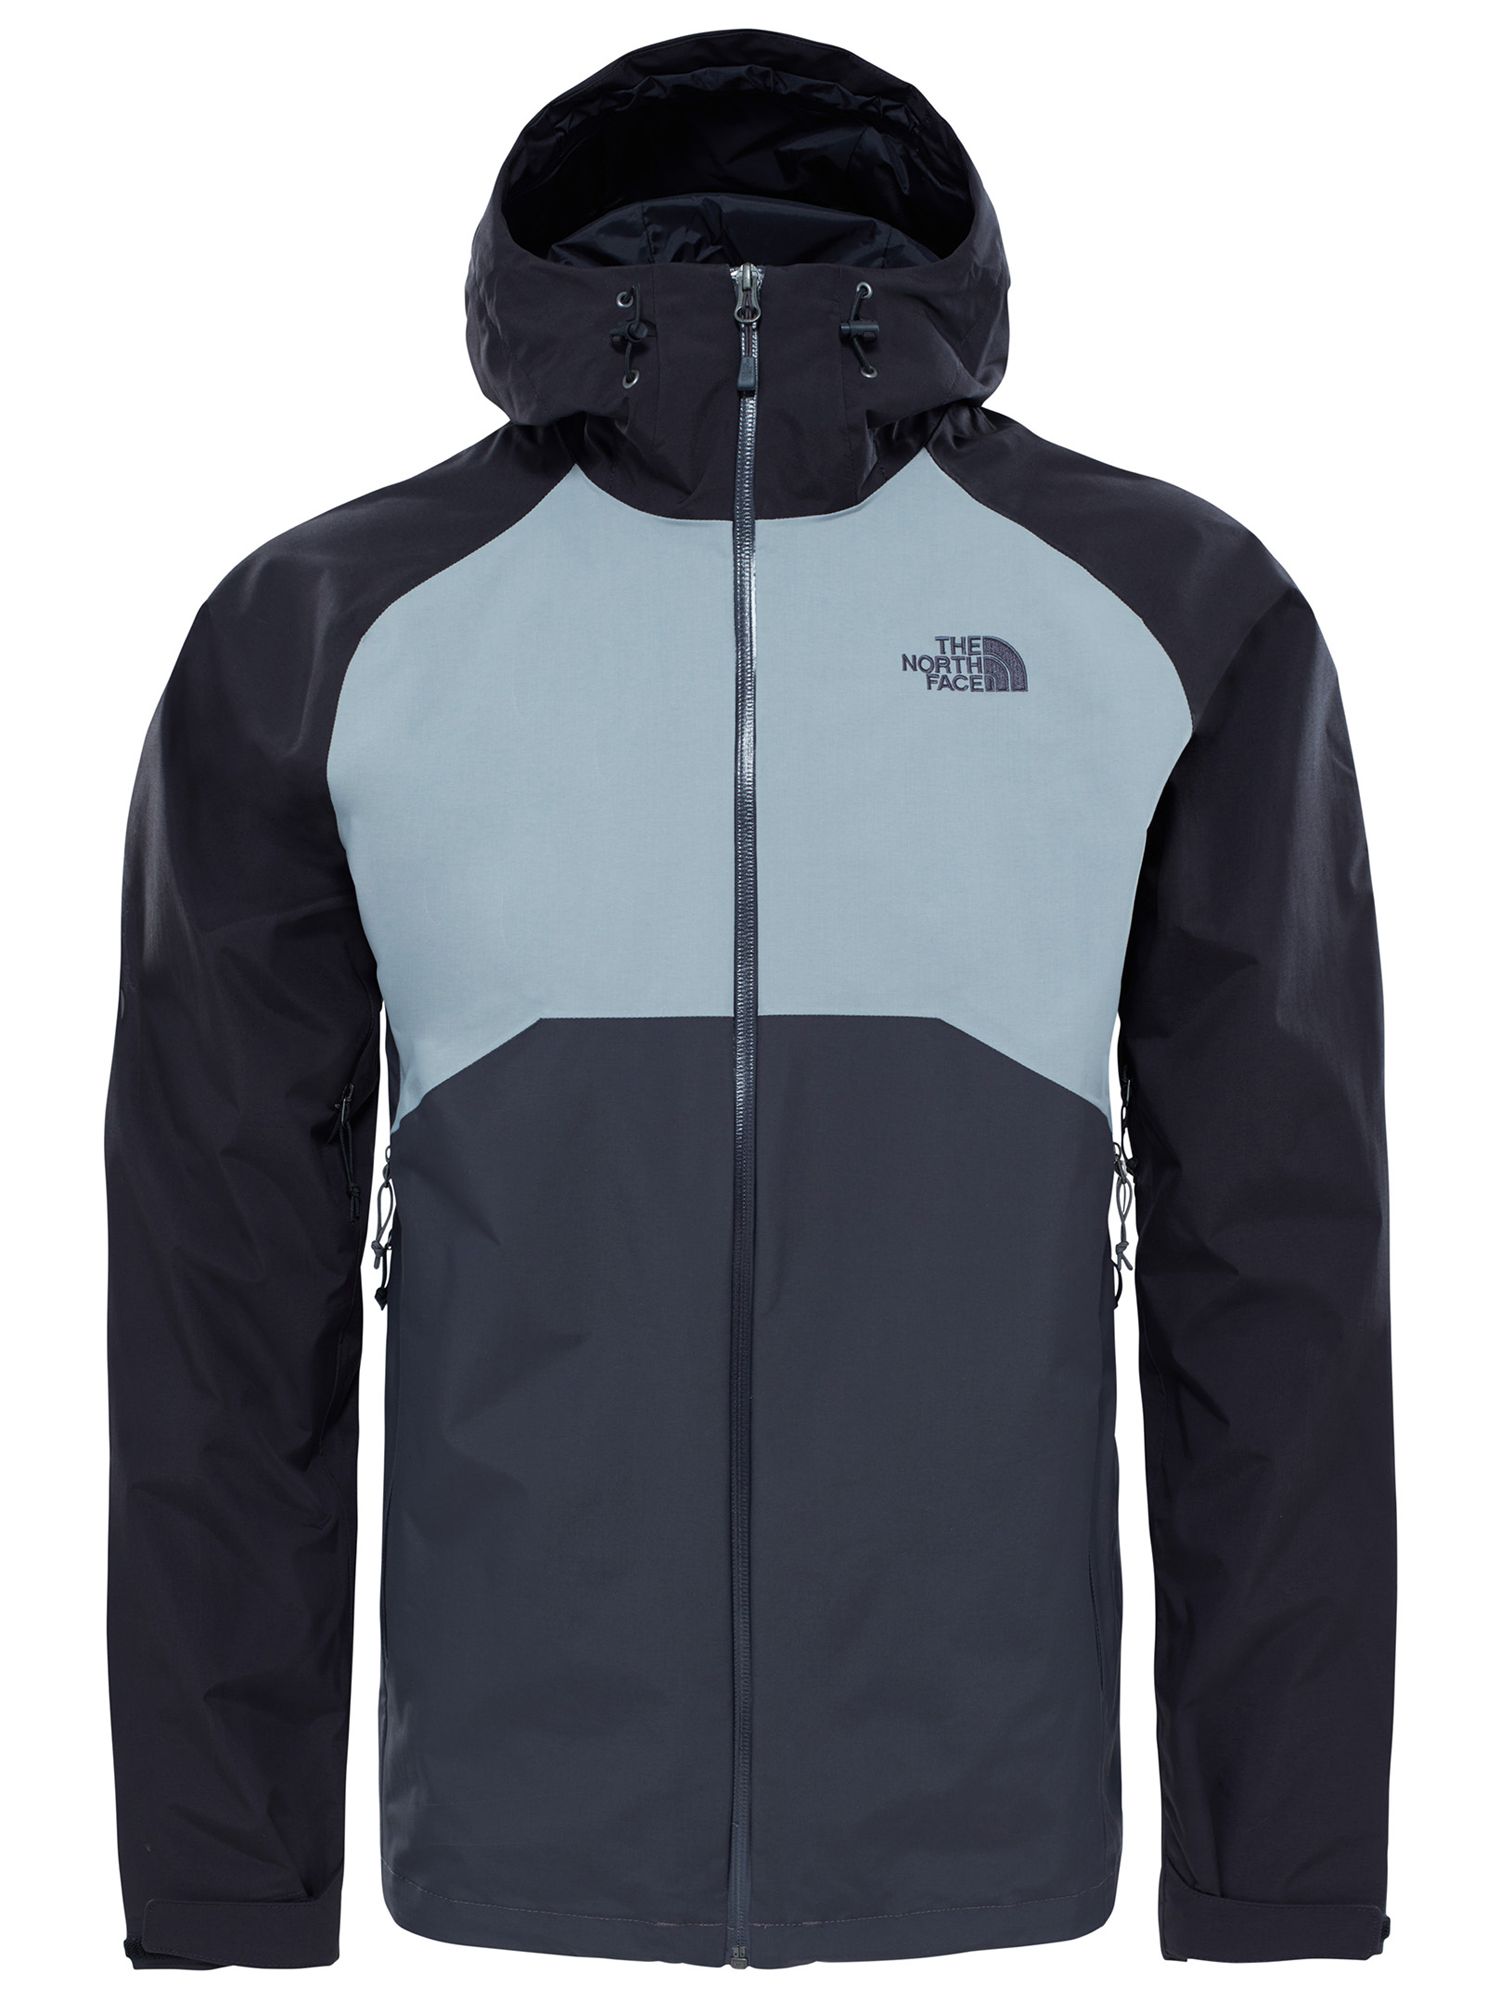 The North Face Stratos Men's Jacket Review